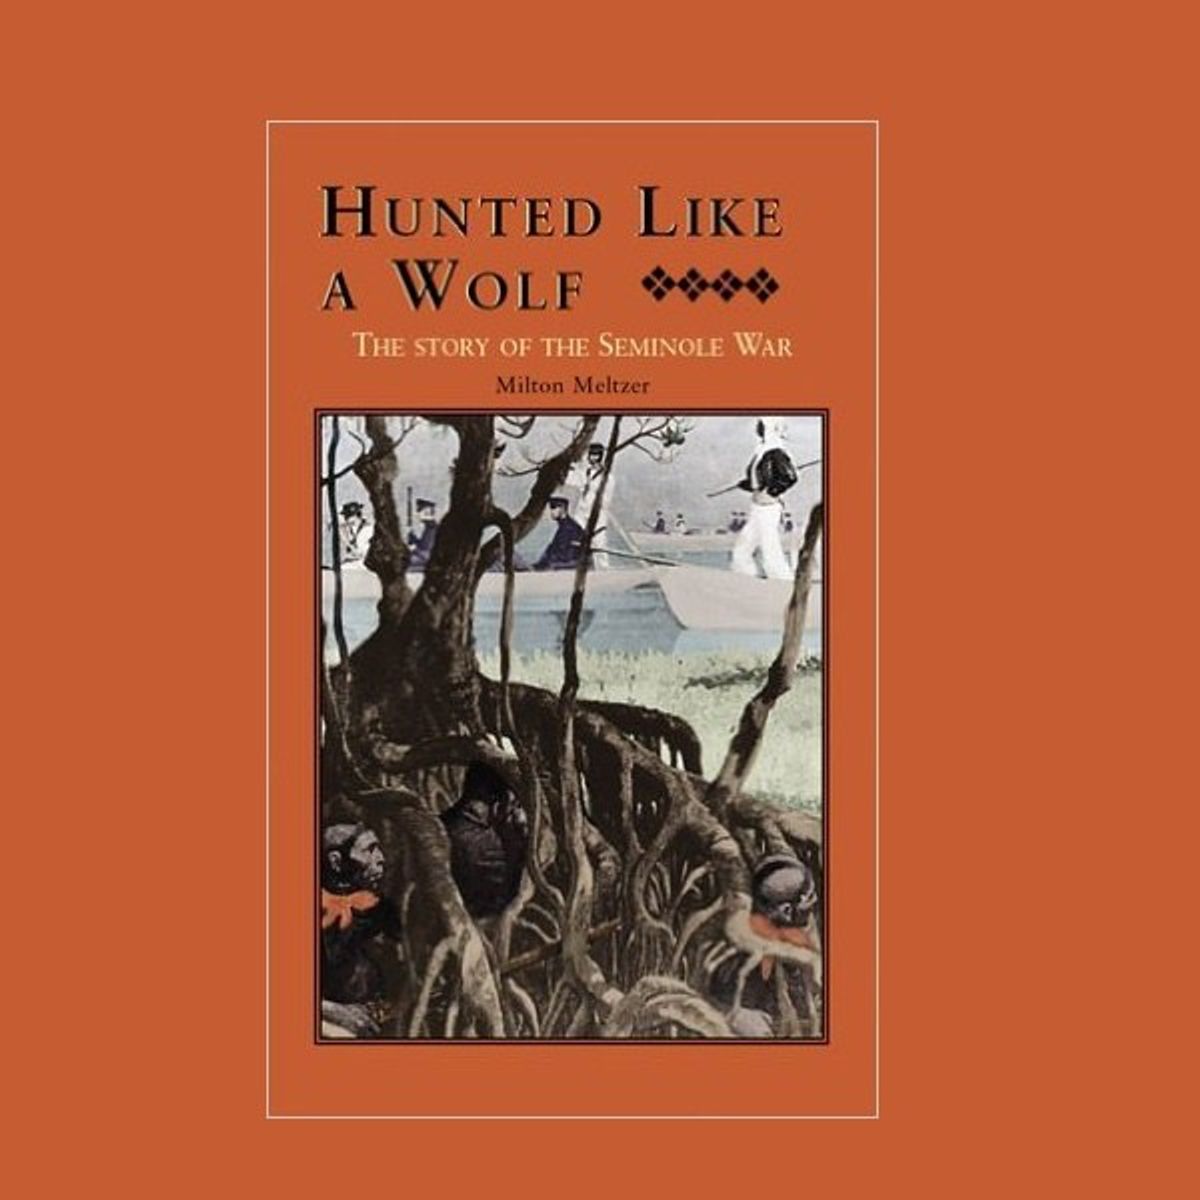 Book Review: Hunted Like A Wolf by Milton Meltzer